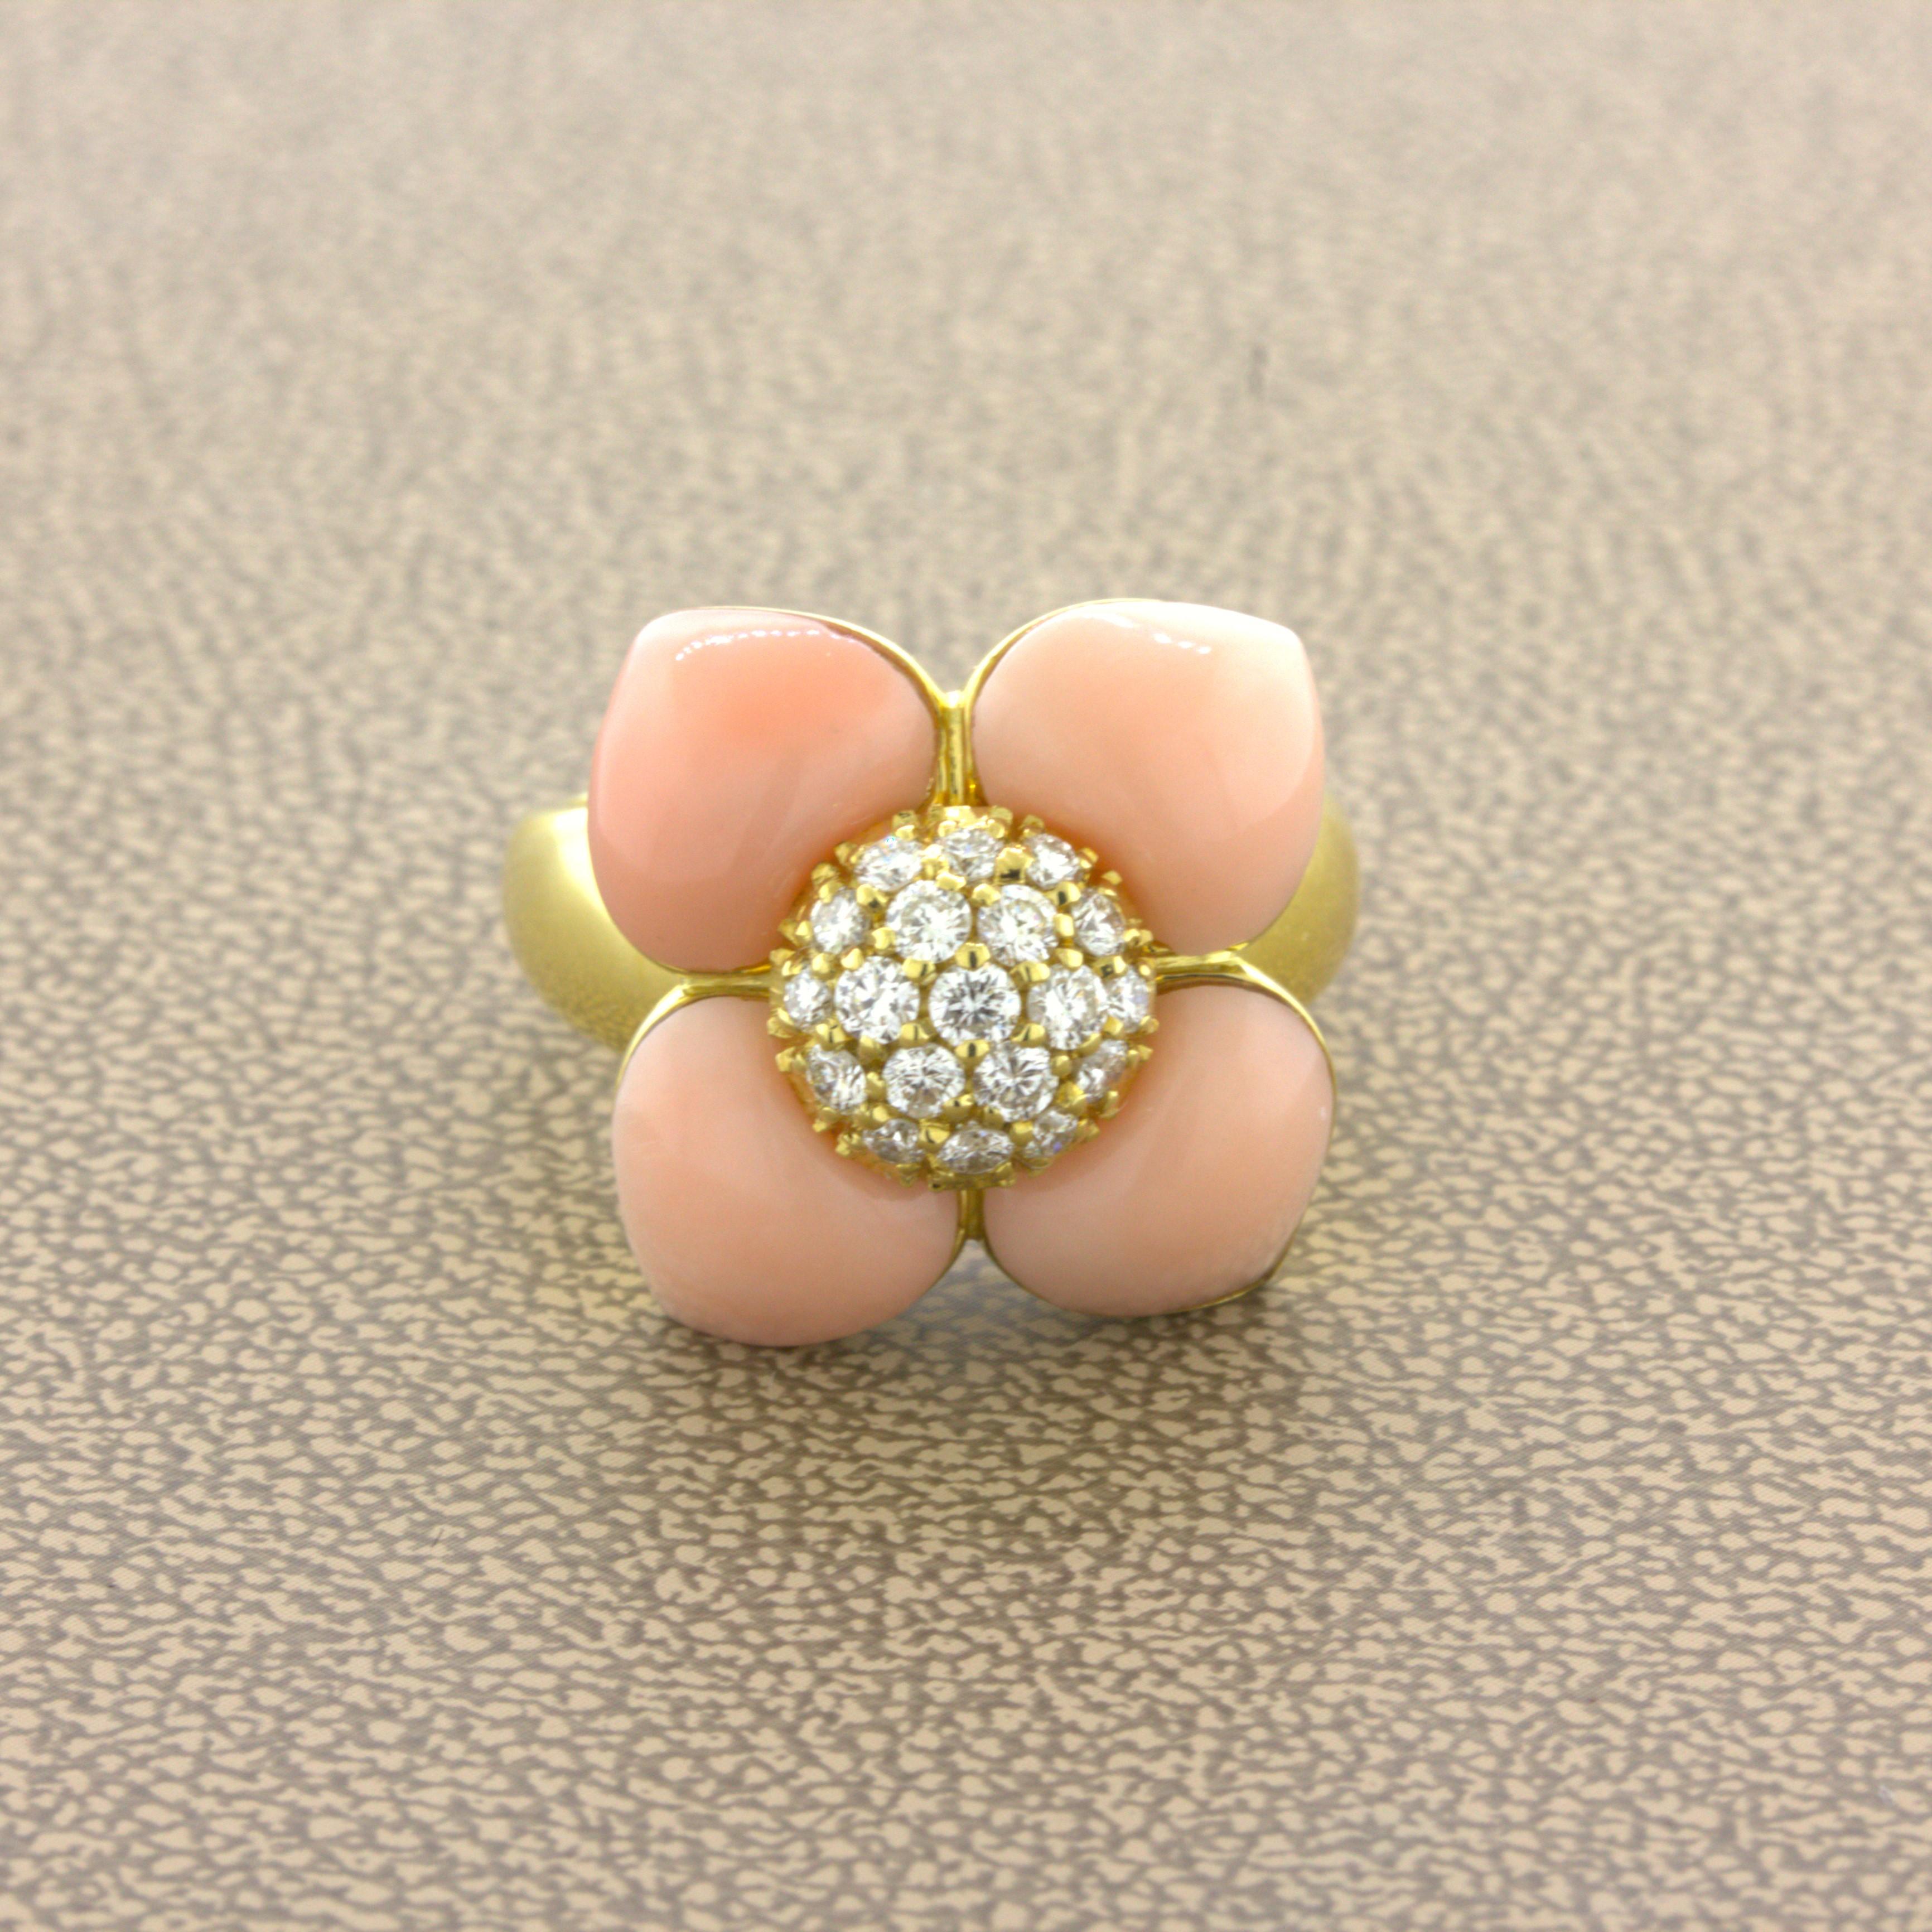 Angel-Skin Coral Diamond 18K Yellow Gold Flower Ring

A sweet and stylish yellow gold ring featuring 4 angel skin coral flower pedals. The coral have a soft luscious pink color with excellent luster giving it the trade name “angel skin.” It is